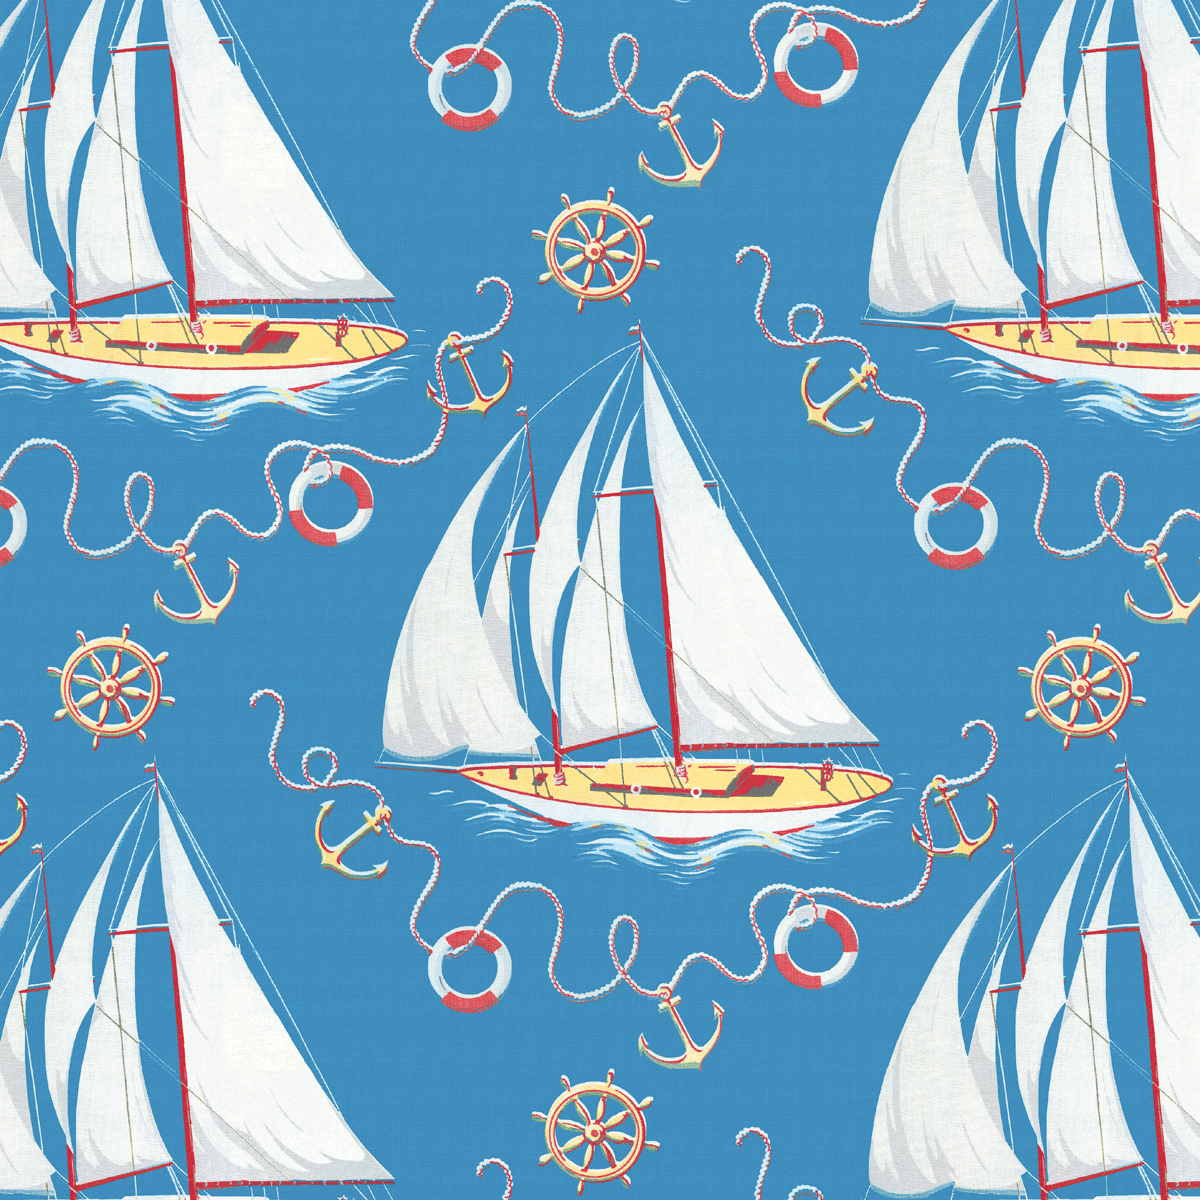 a picture of a sailboat on a blue background.